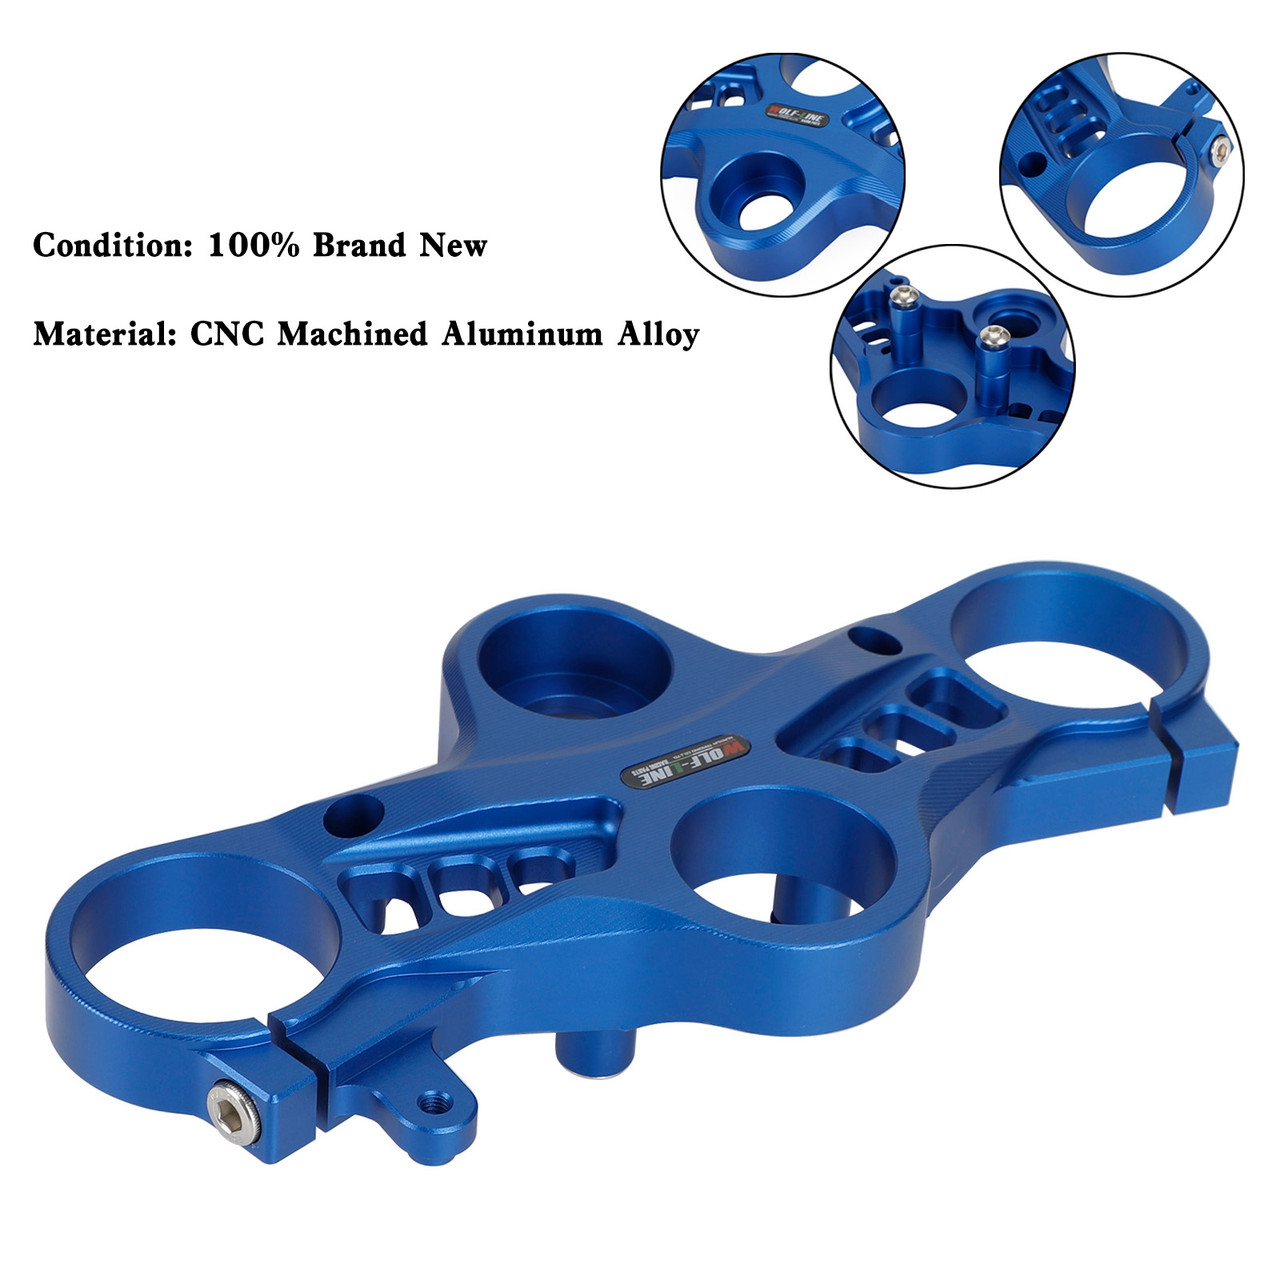 Aluminum Upper Front Top Triple Tree Clamp For Yamaha YZF-R7 2021-2023 BLU